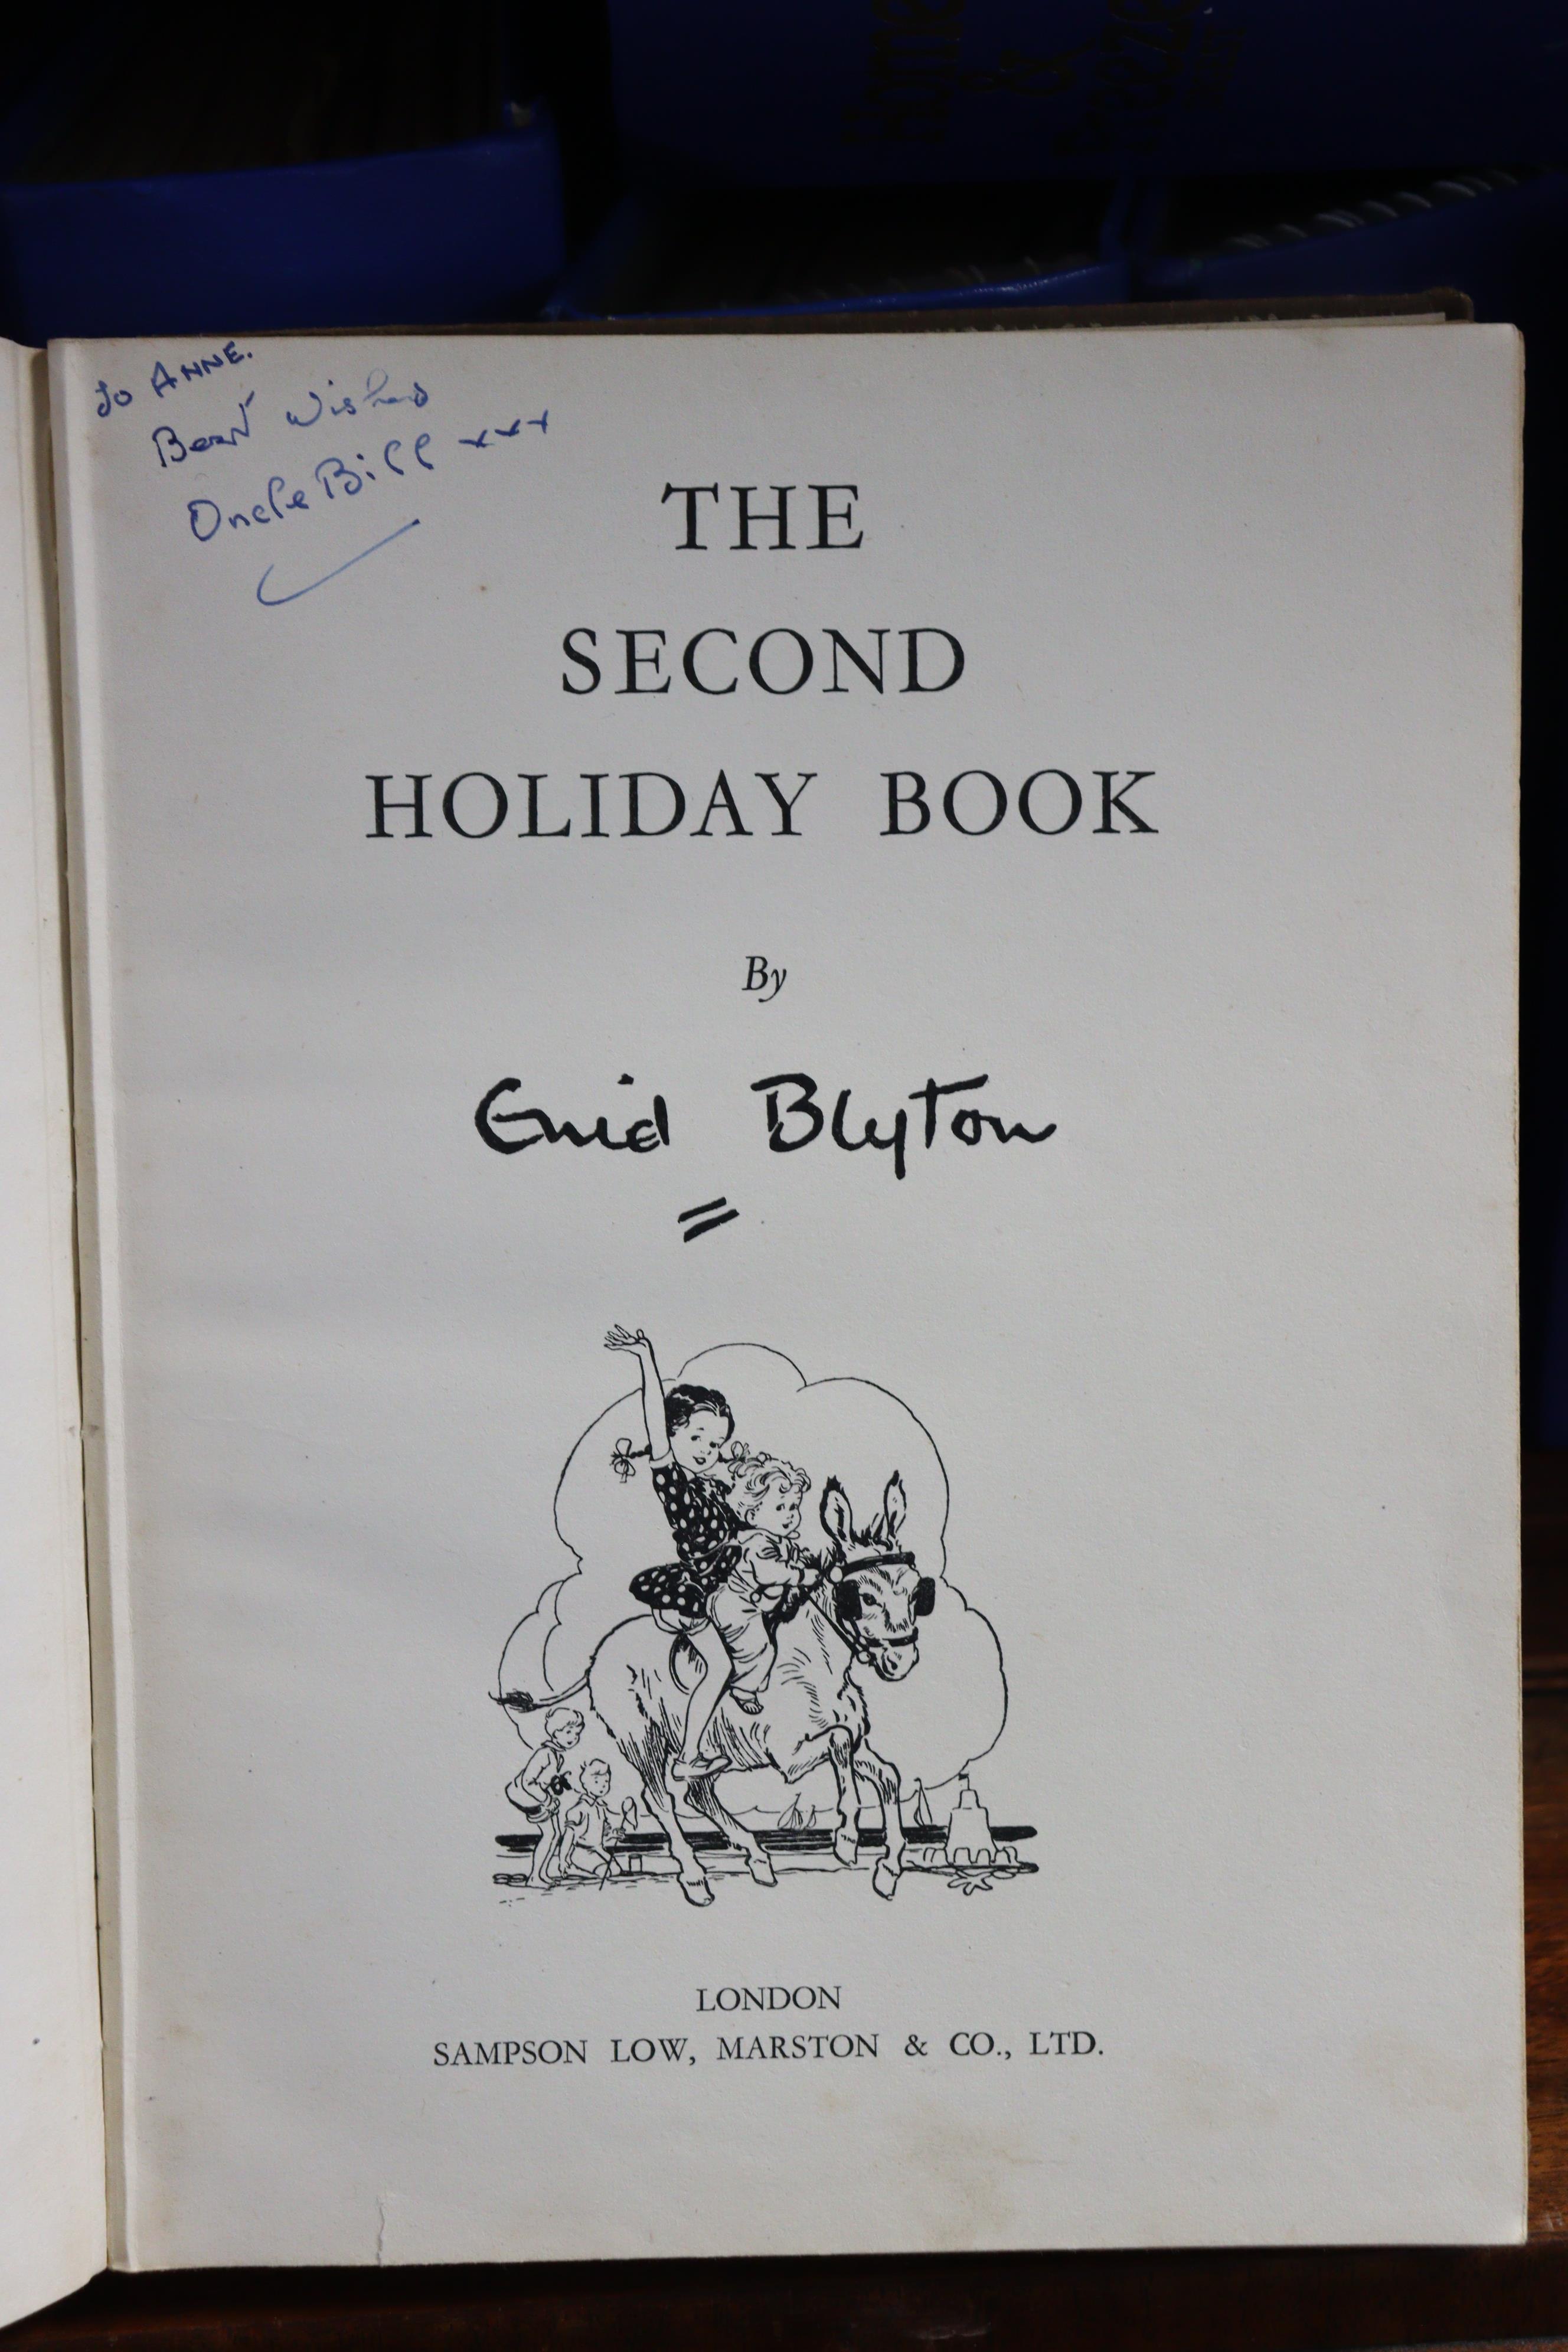 A vintage volume “The Second Holiday Book” by Enid Blyton, one volume “The Art of Walt Disney” by - Image 2 of 6